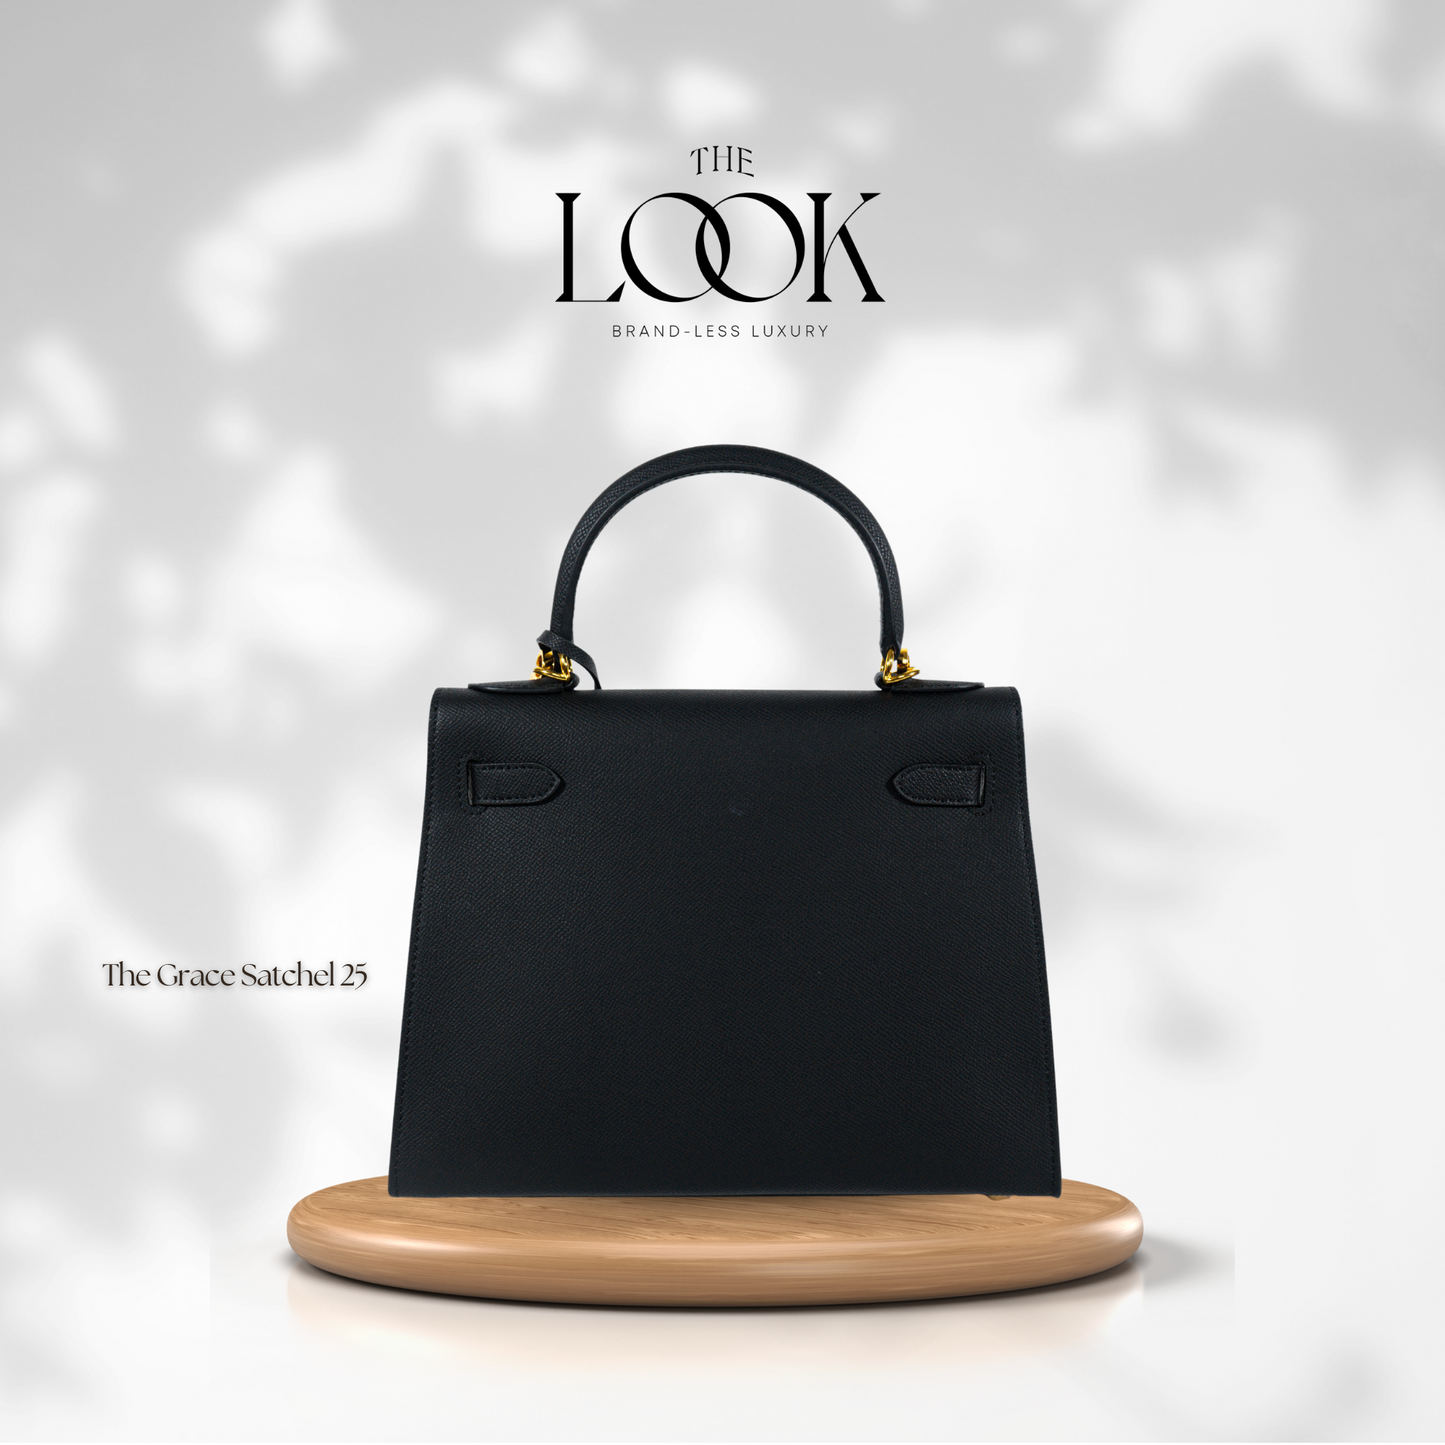 The Grace 25 Satchel Epsom Leather in Noir GHW by The Look